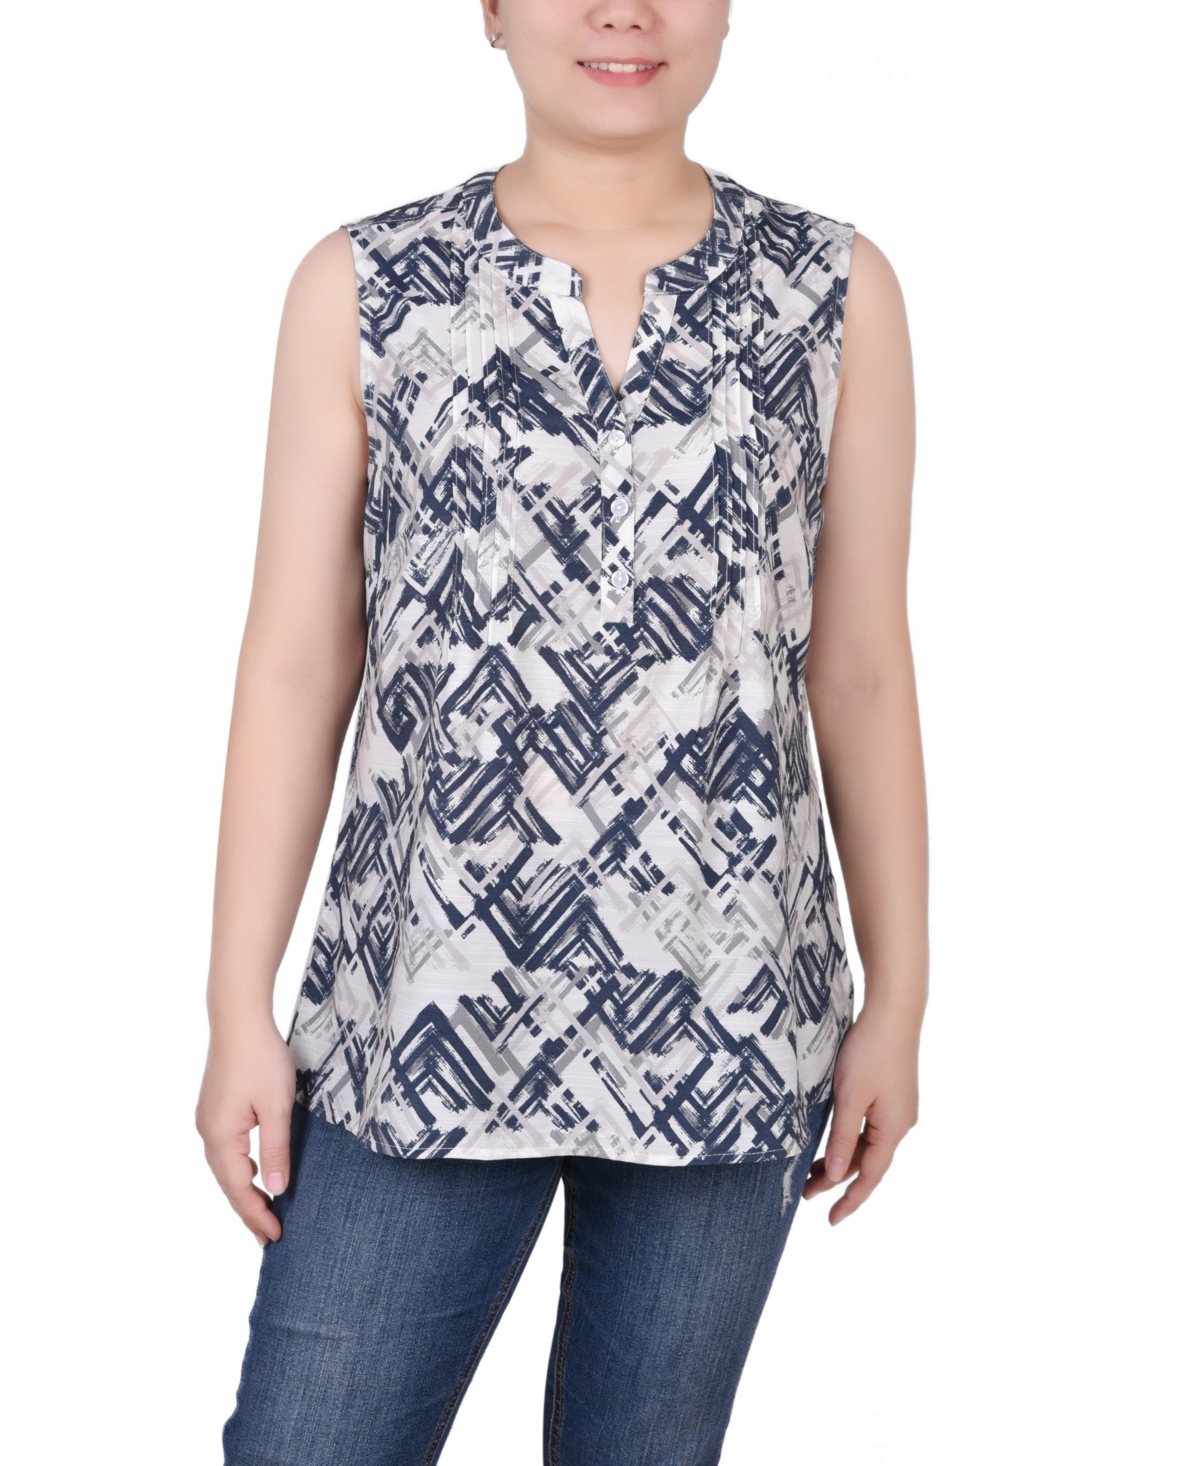 NY COLLECTION WOMEN'S SLEEVELESS PINTUCKED BLOUSE